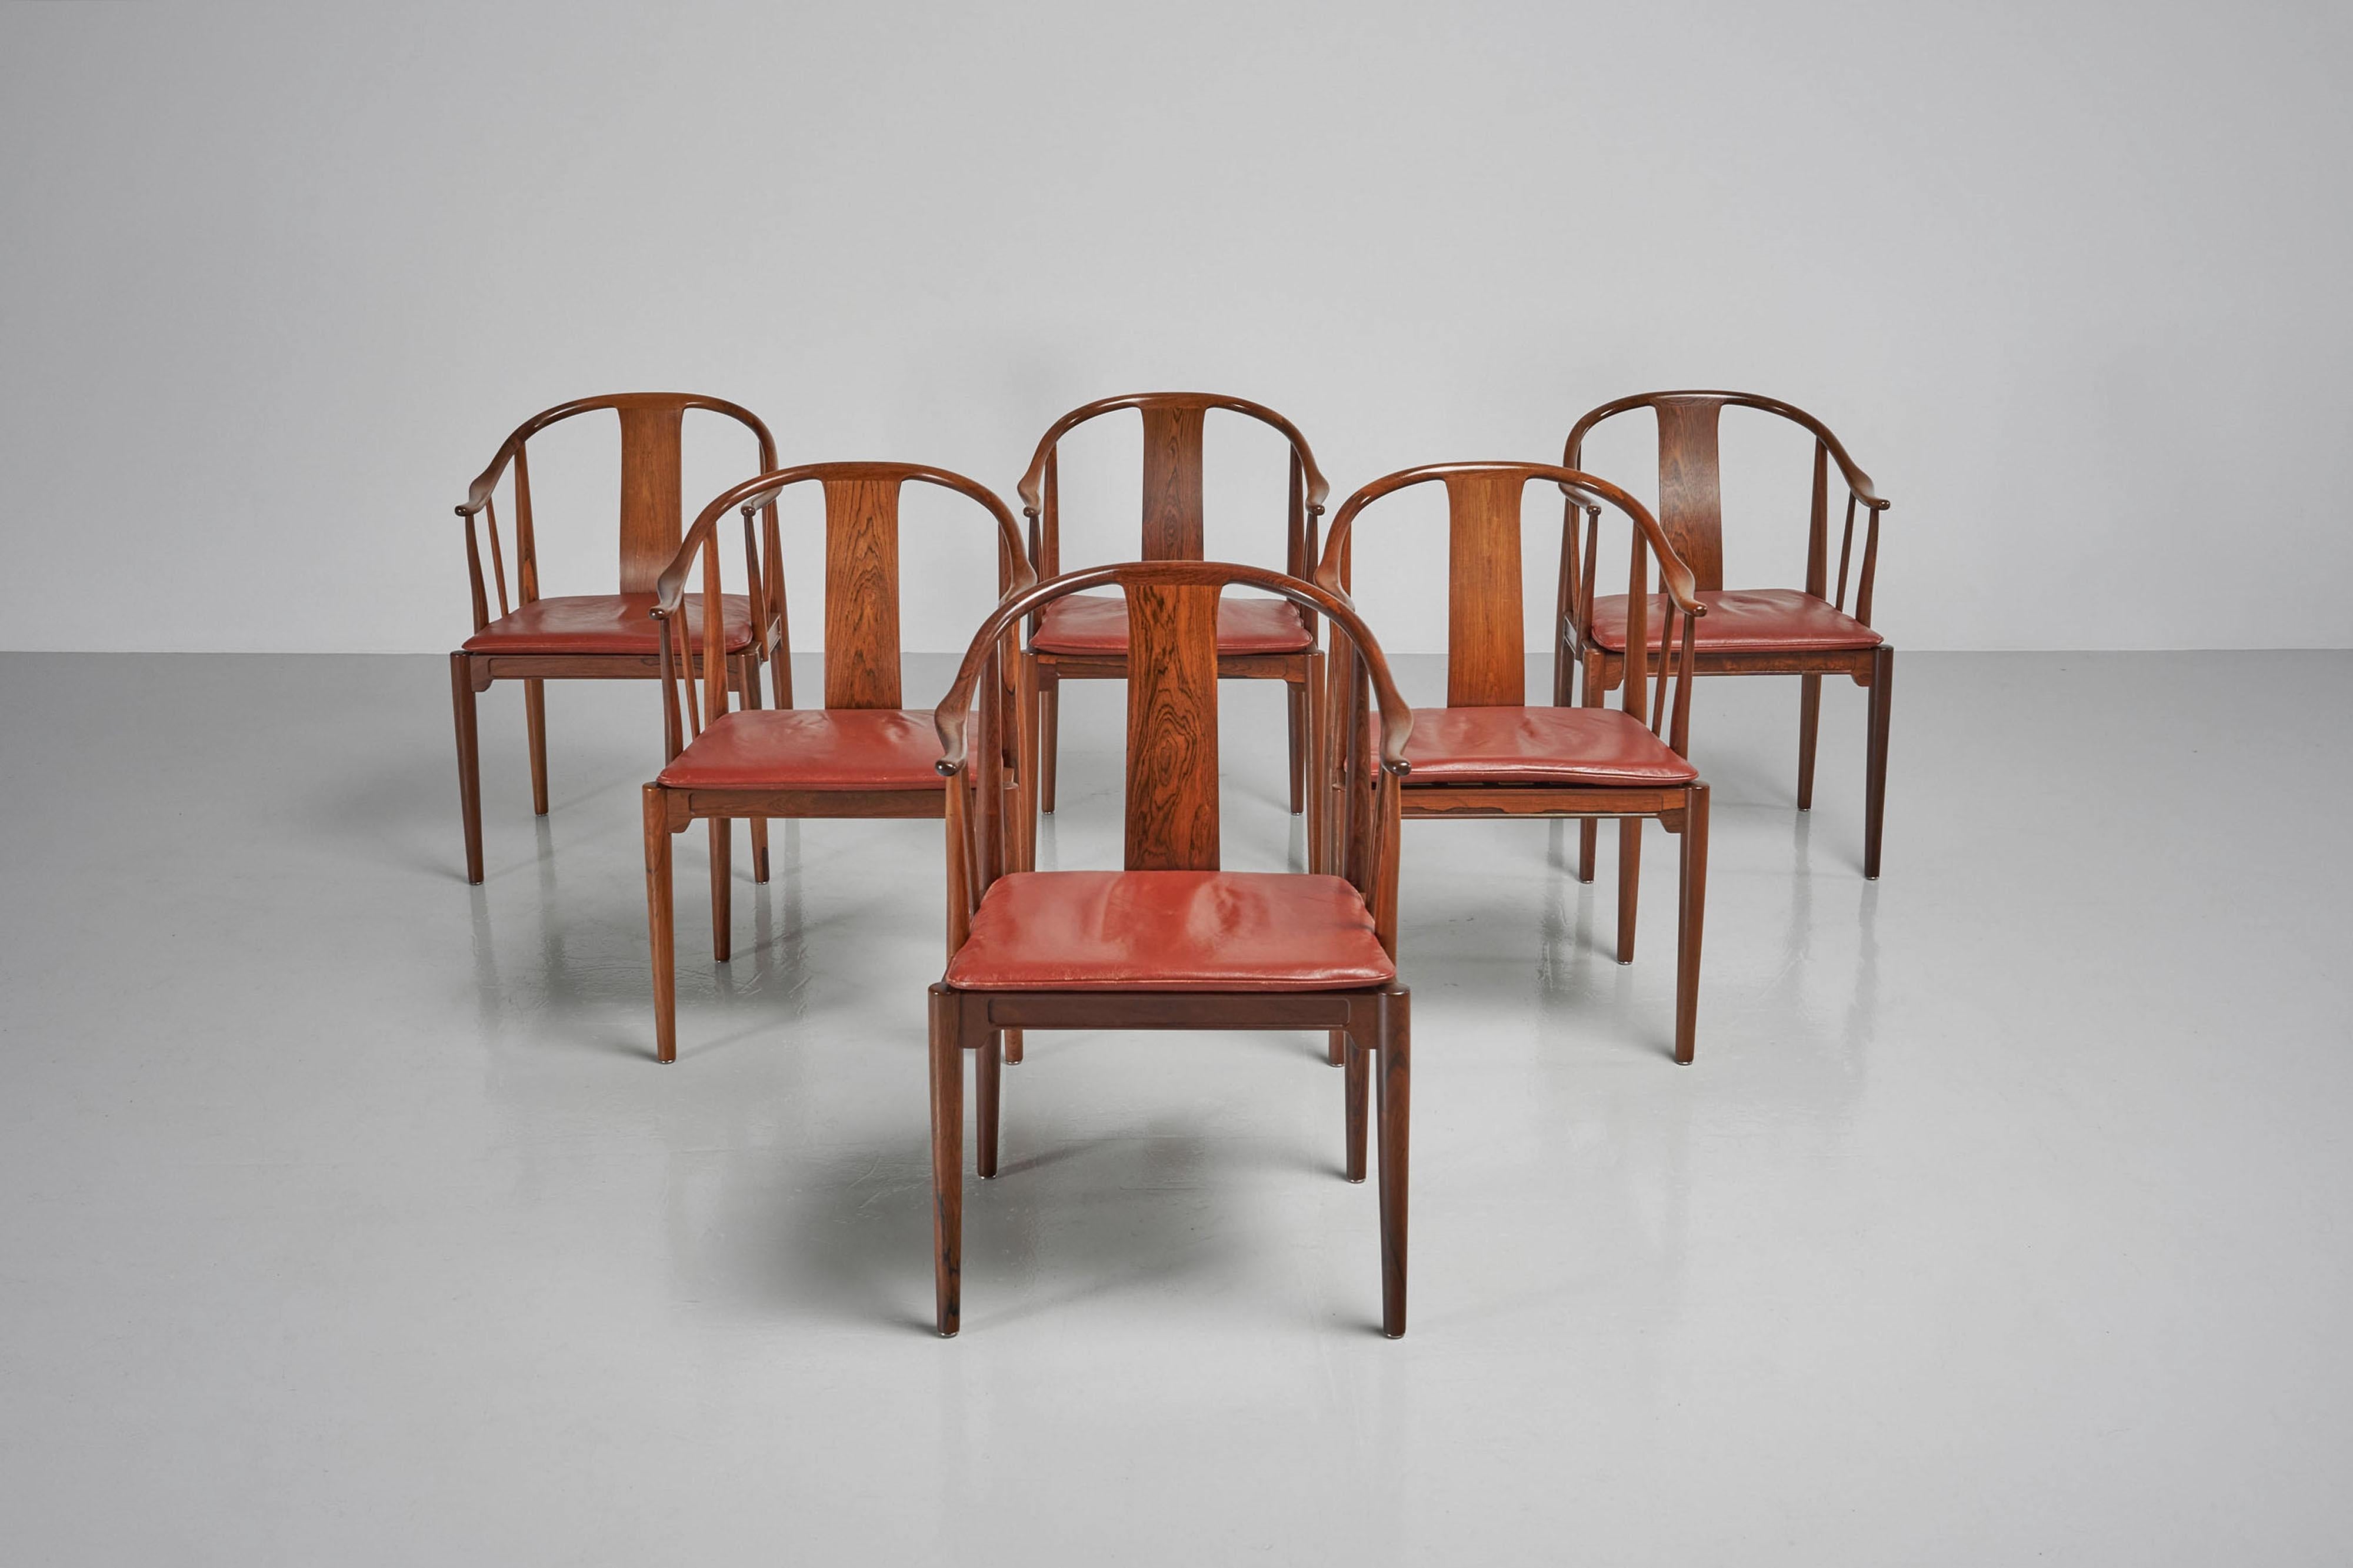 Extraordinary Hans Wegner China chairs designed in 1944 and manufactured by Fritz Hansen in Denmark in 1967. This set of 6 chairs, made of solid rosewood, is an incredibly rare find. Early rosewood versions rarely appear on the market, often only as